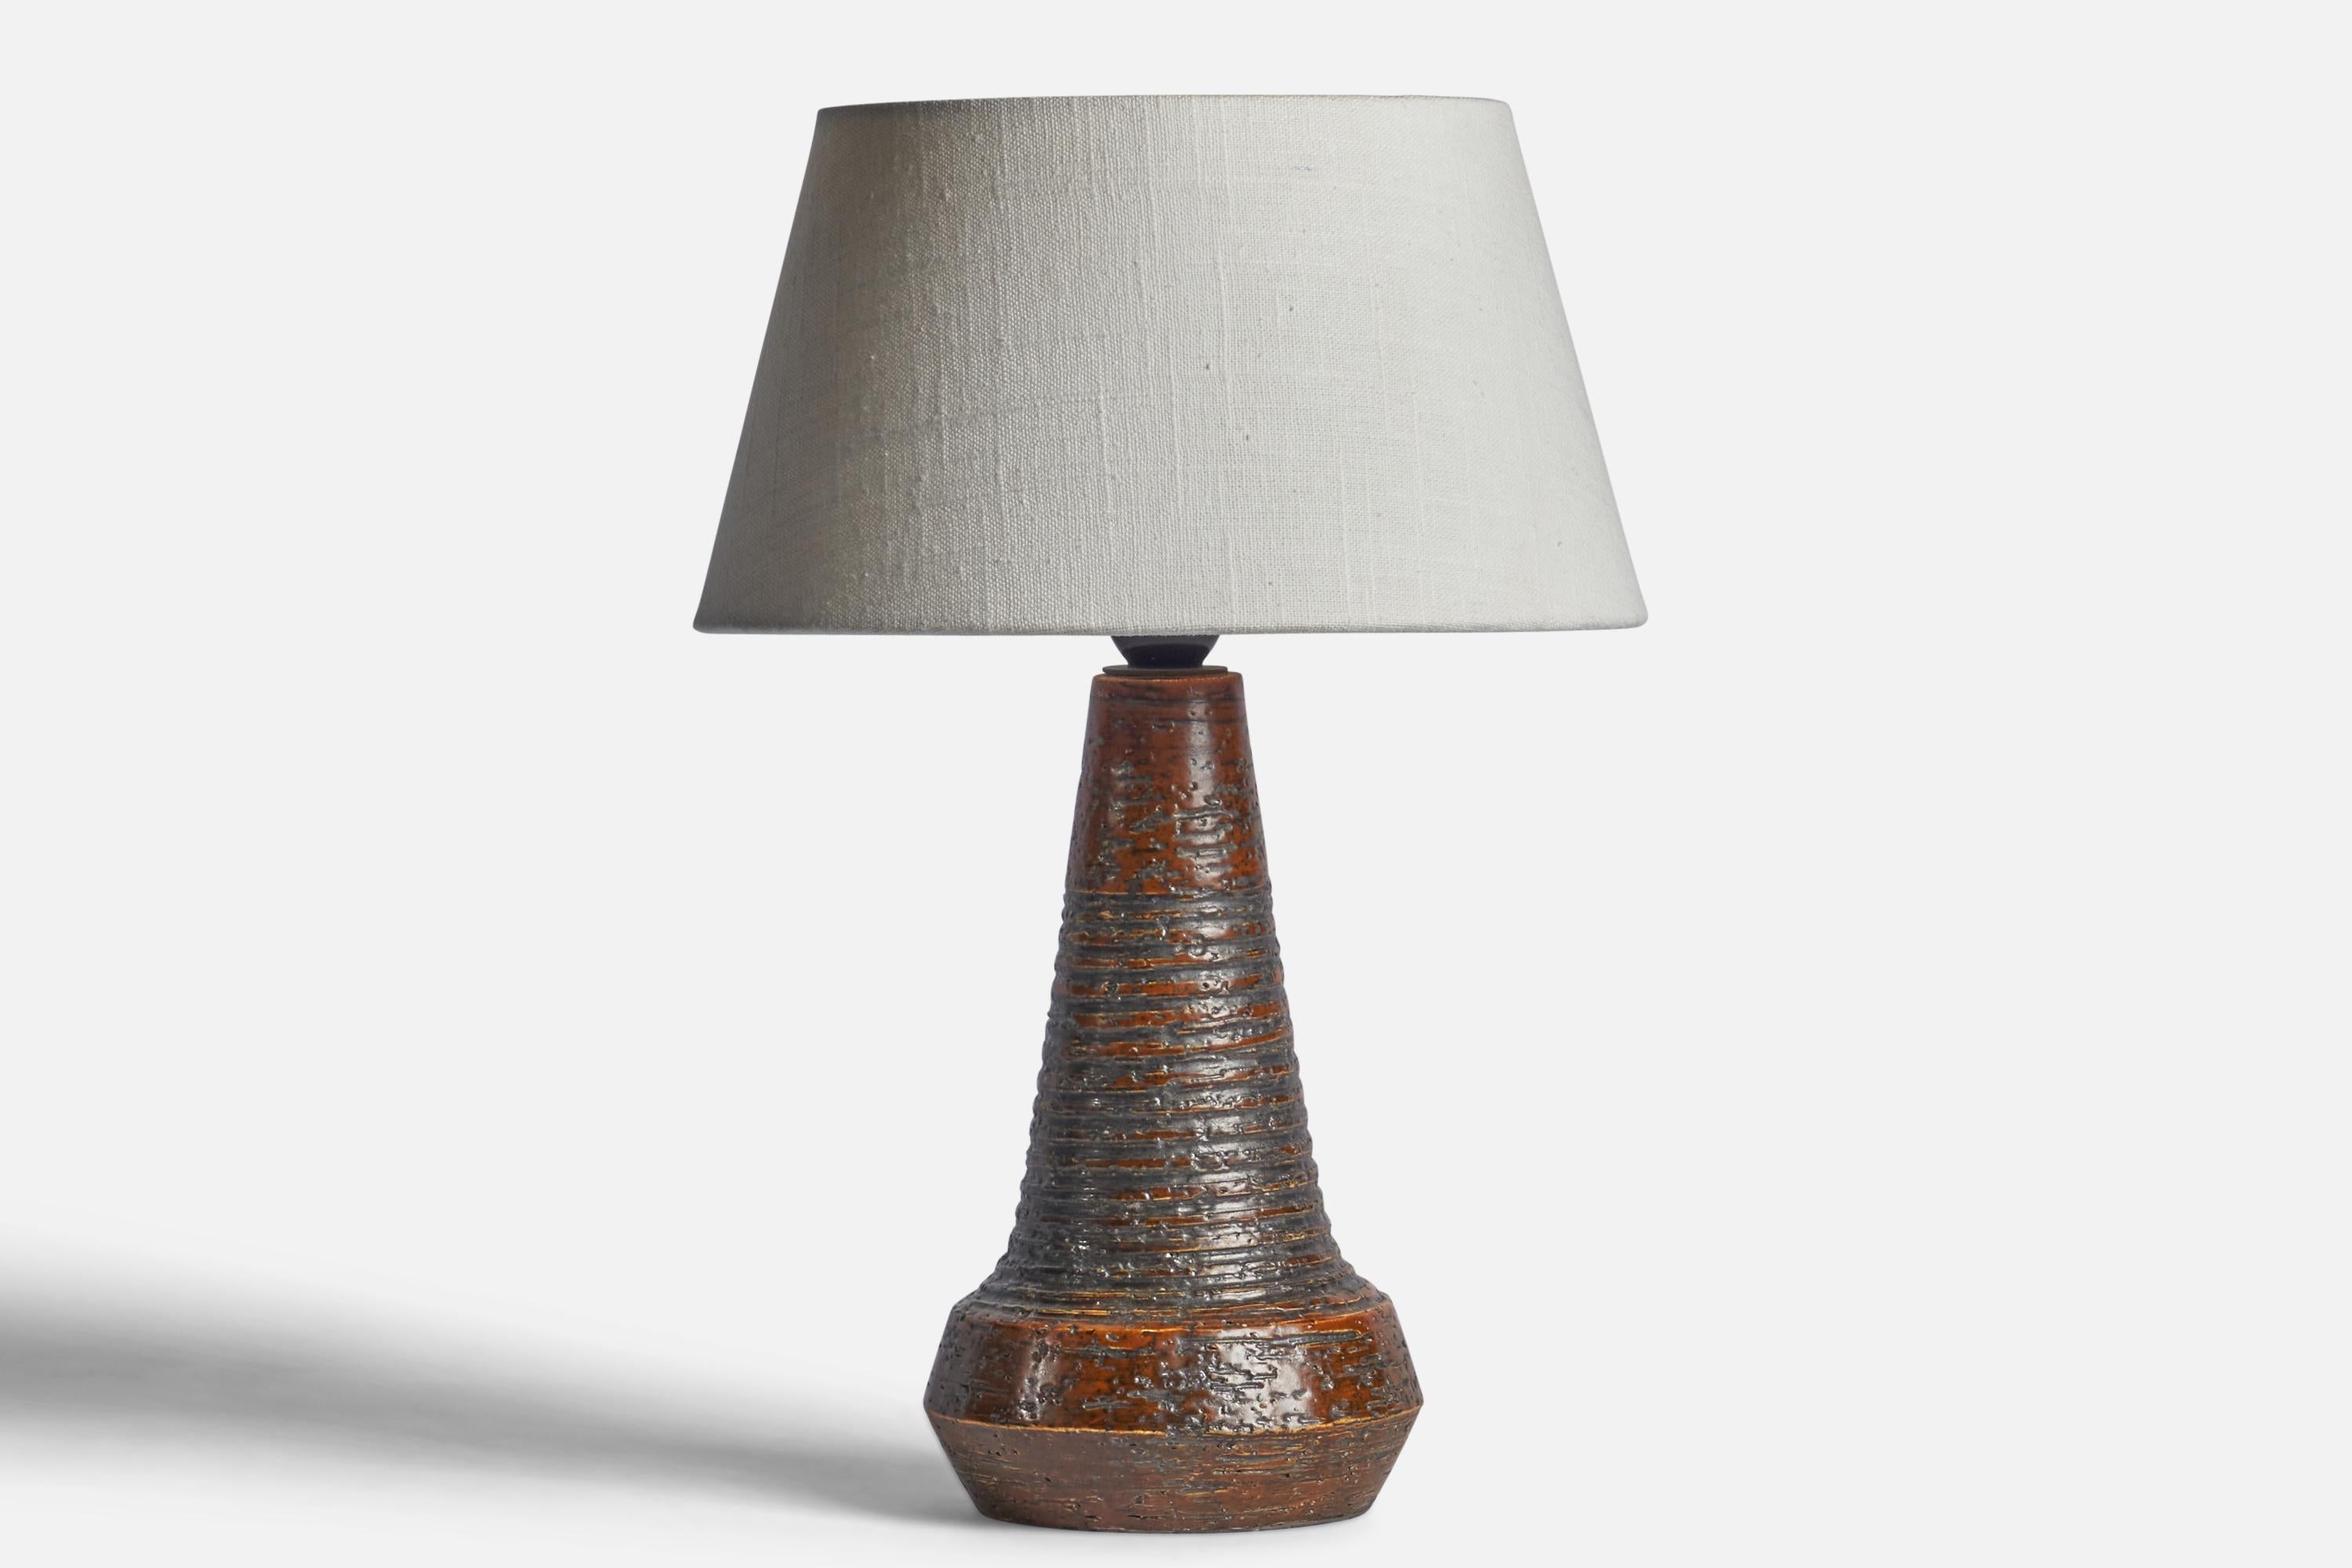 A brown-glazed and incised stoneware table lamp designed and produced in Denmark, 1960s.

Dimensions of Lamp (inches): 12